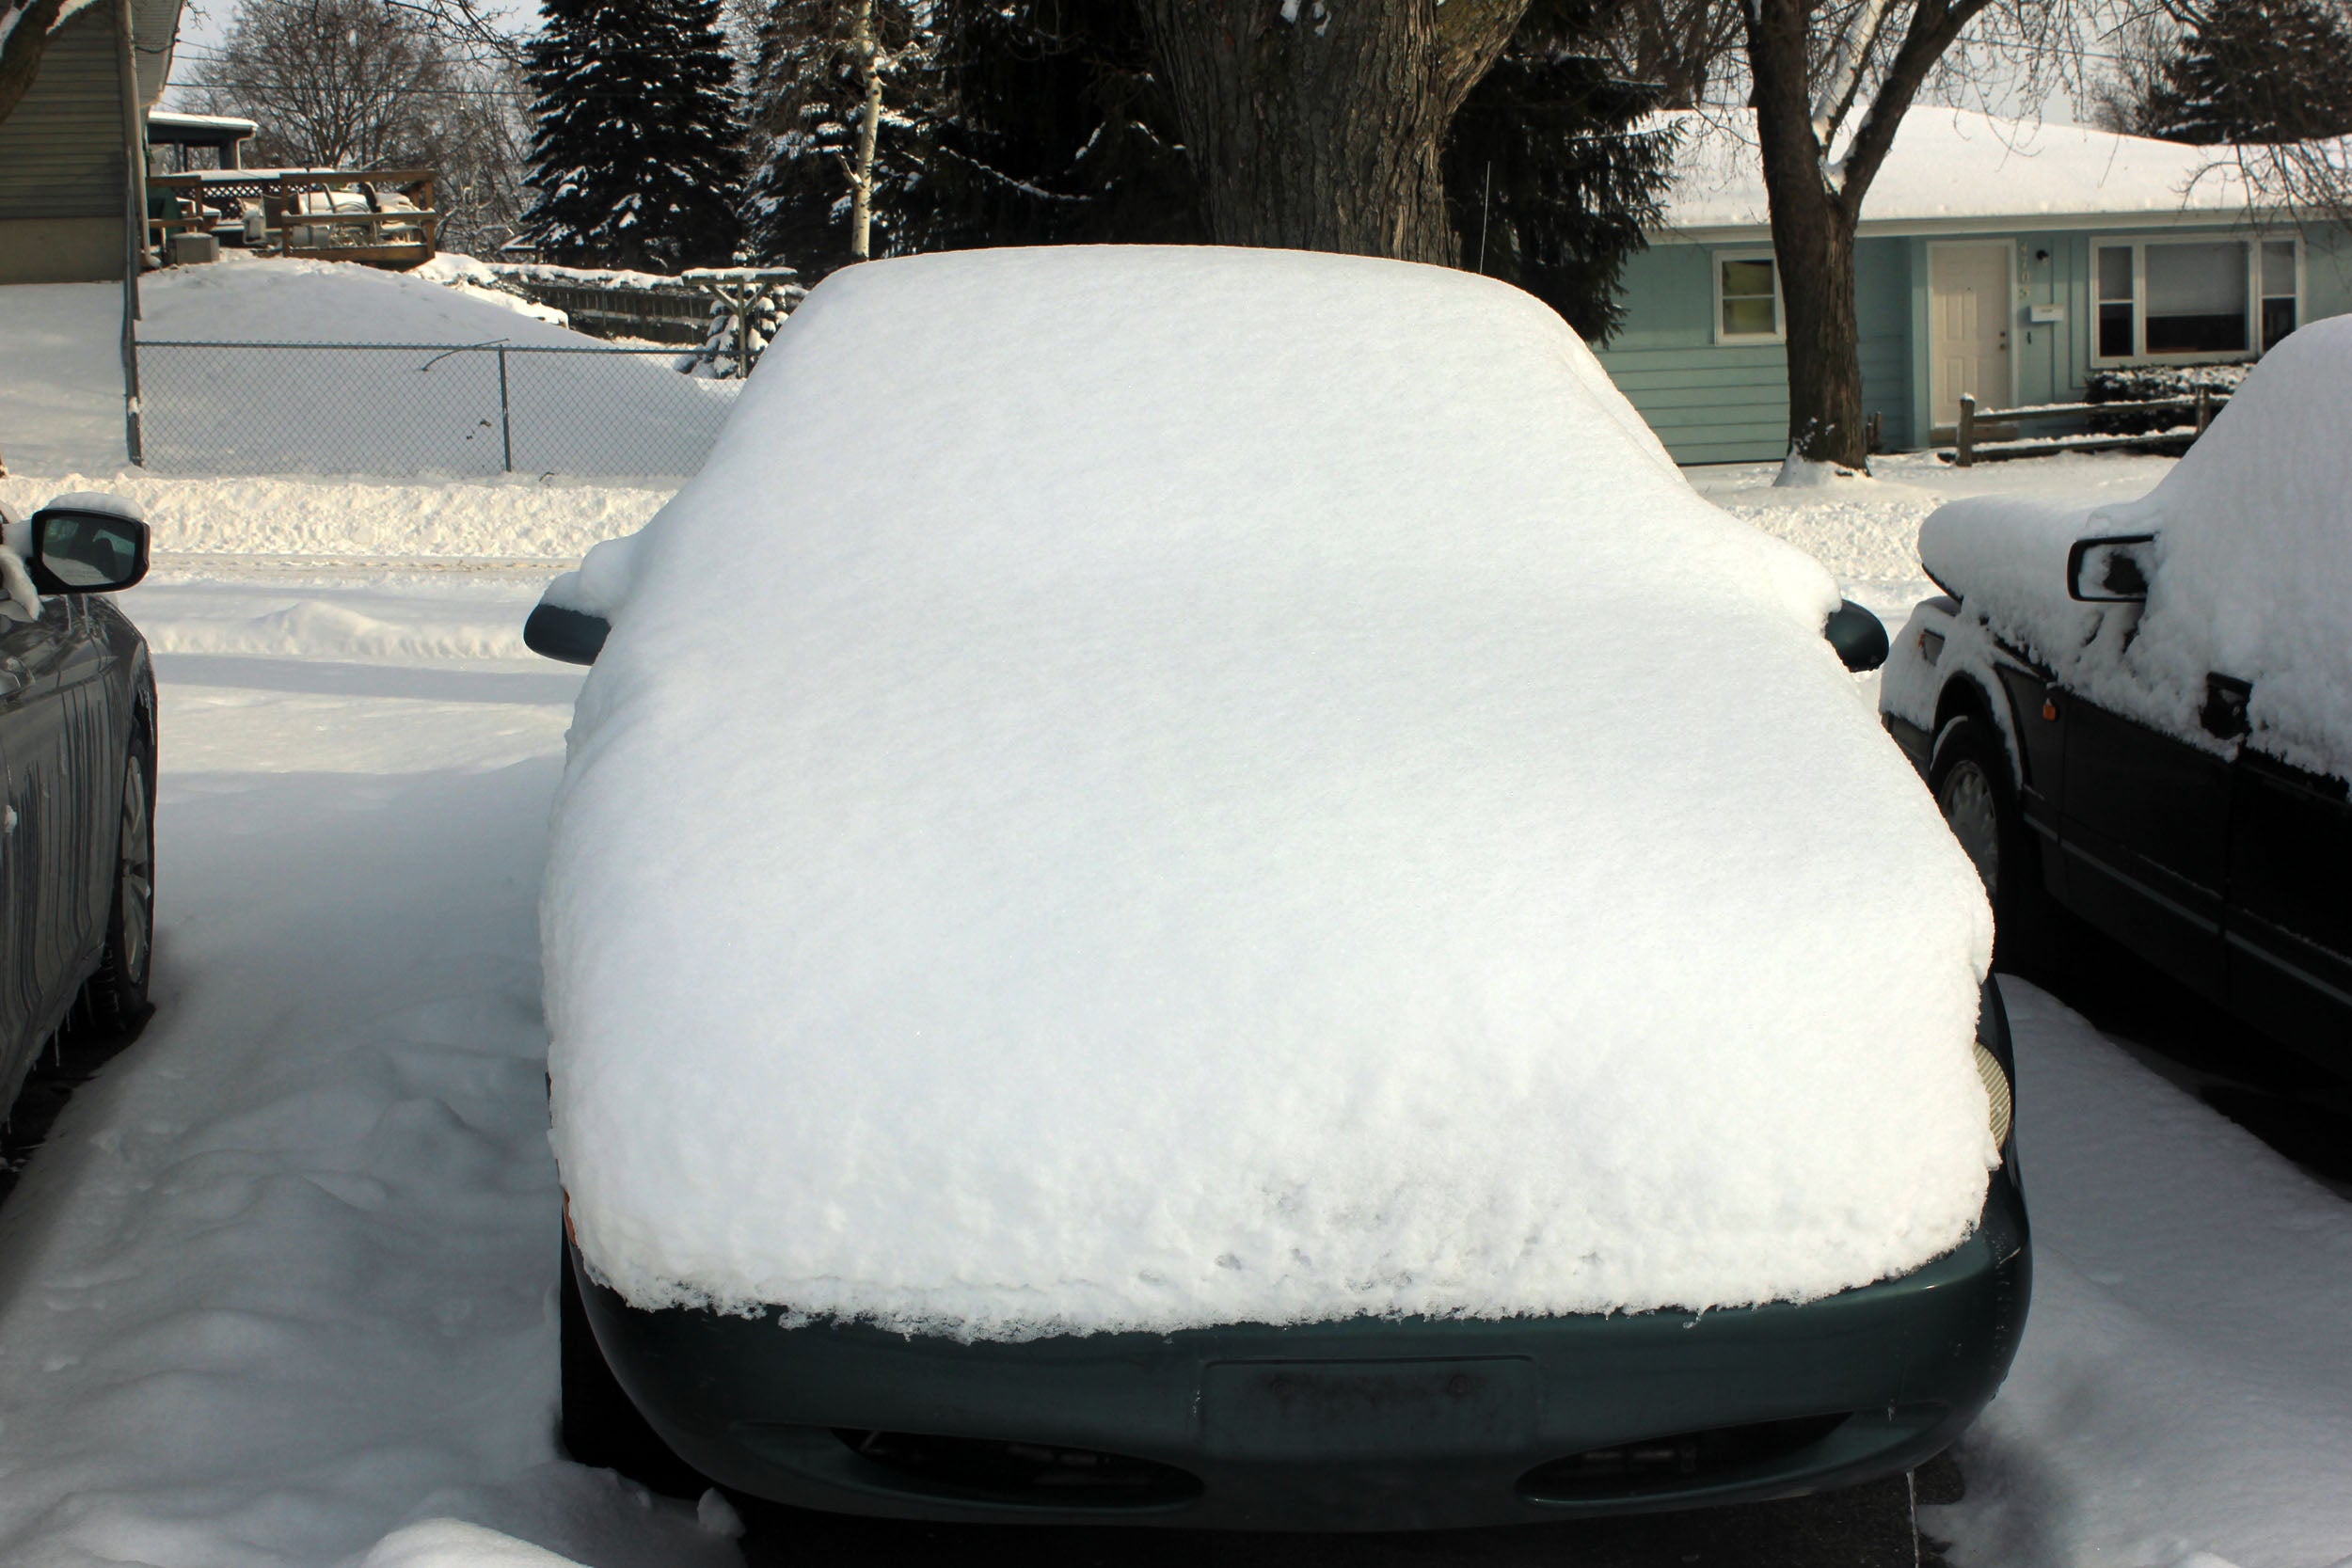 Toyota Camry Covered in Snow